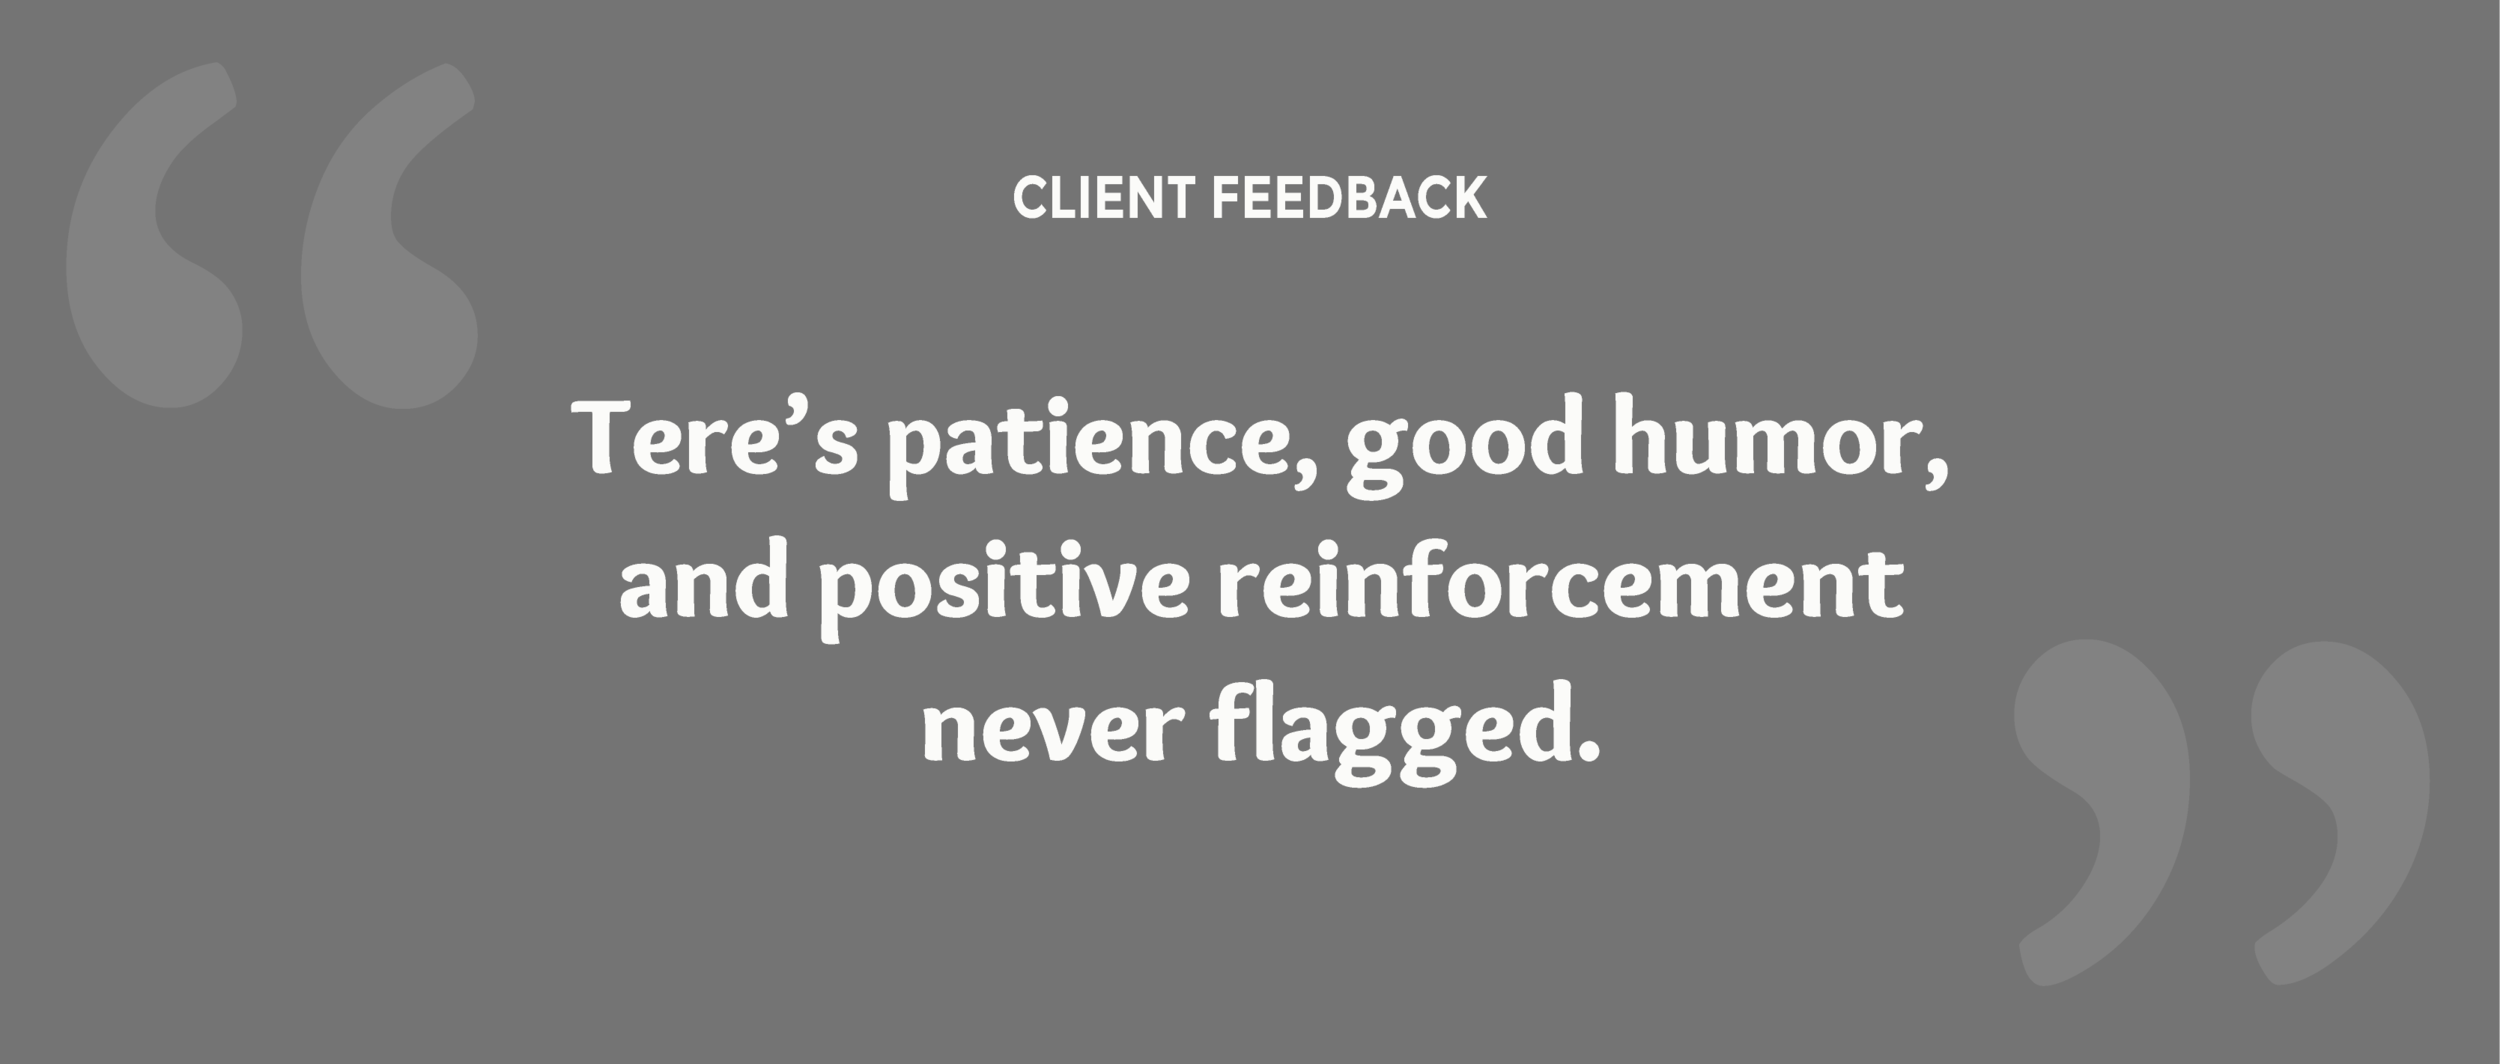 about-client-feedback5.png